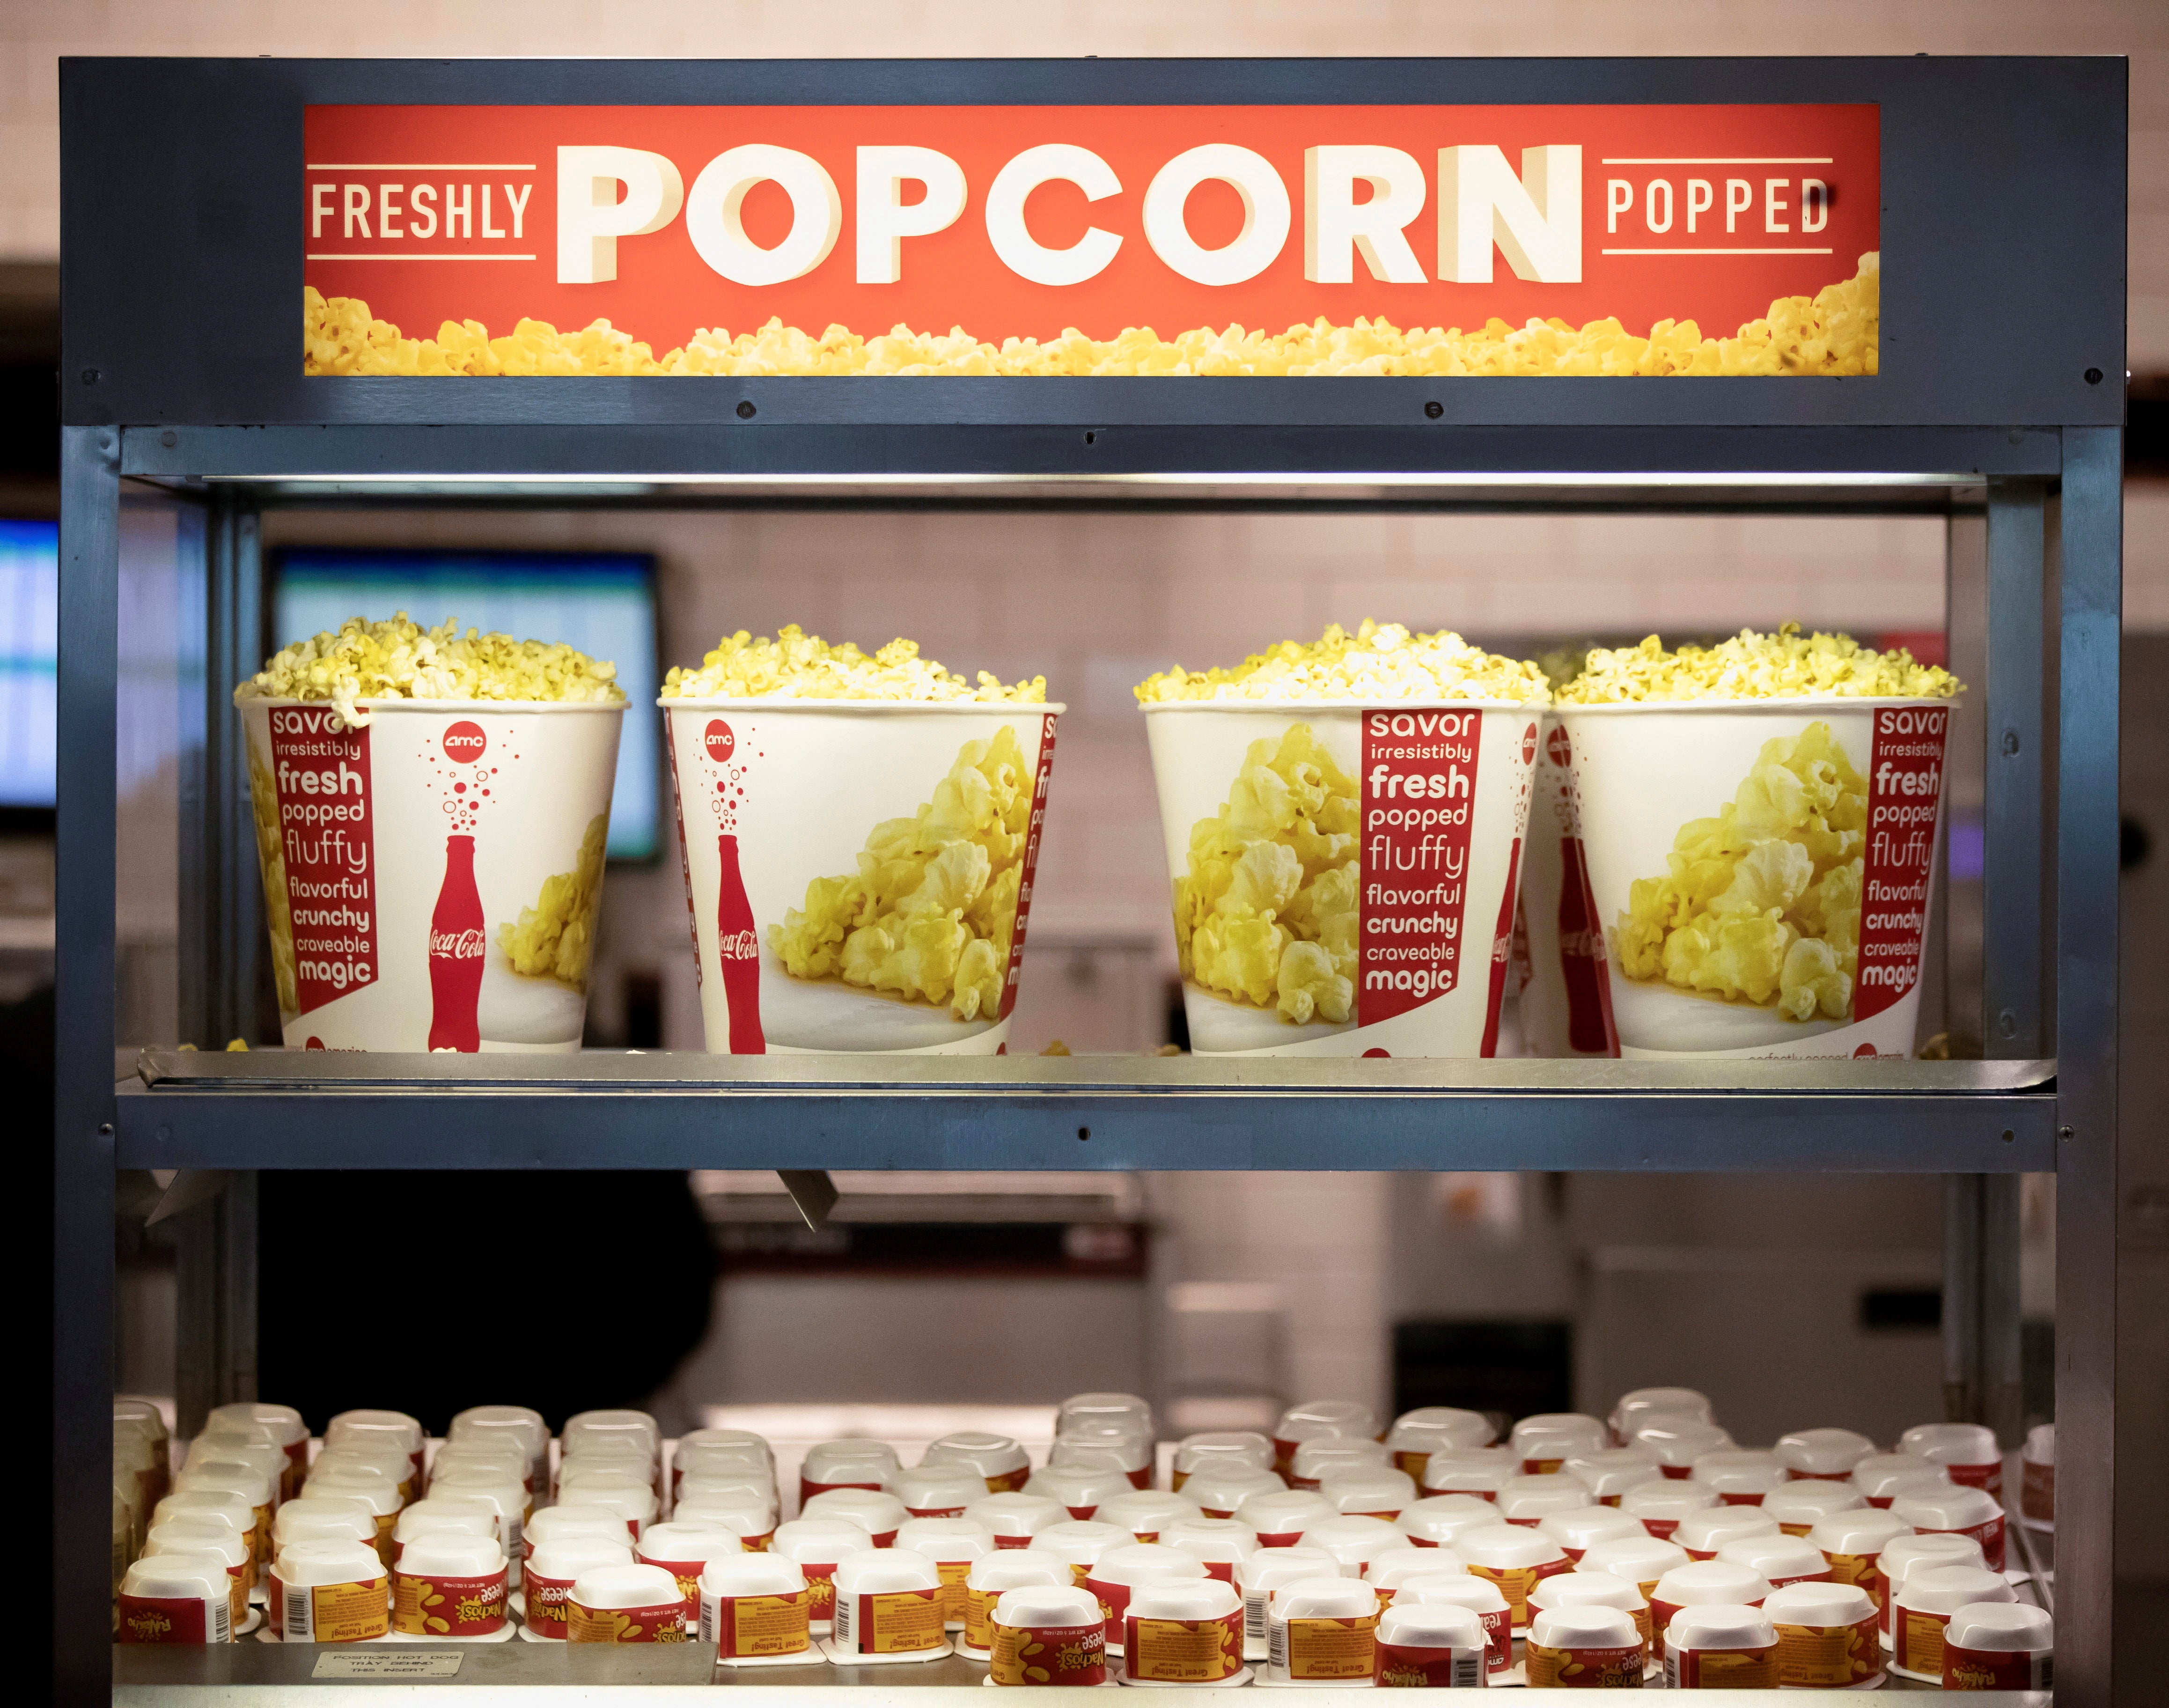 The price of the US cinema chain AMC doubled on Wednesday after it offered free popcorn to its small investors